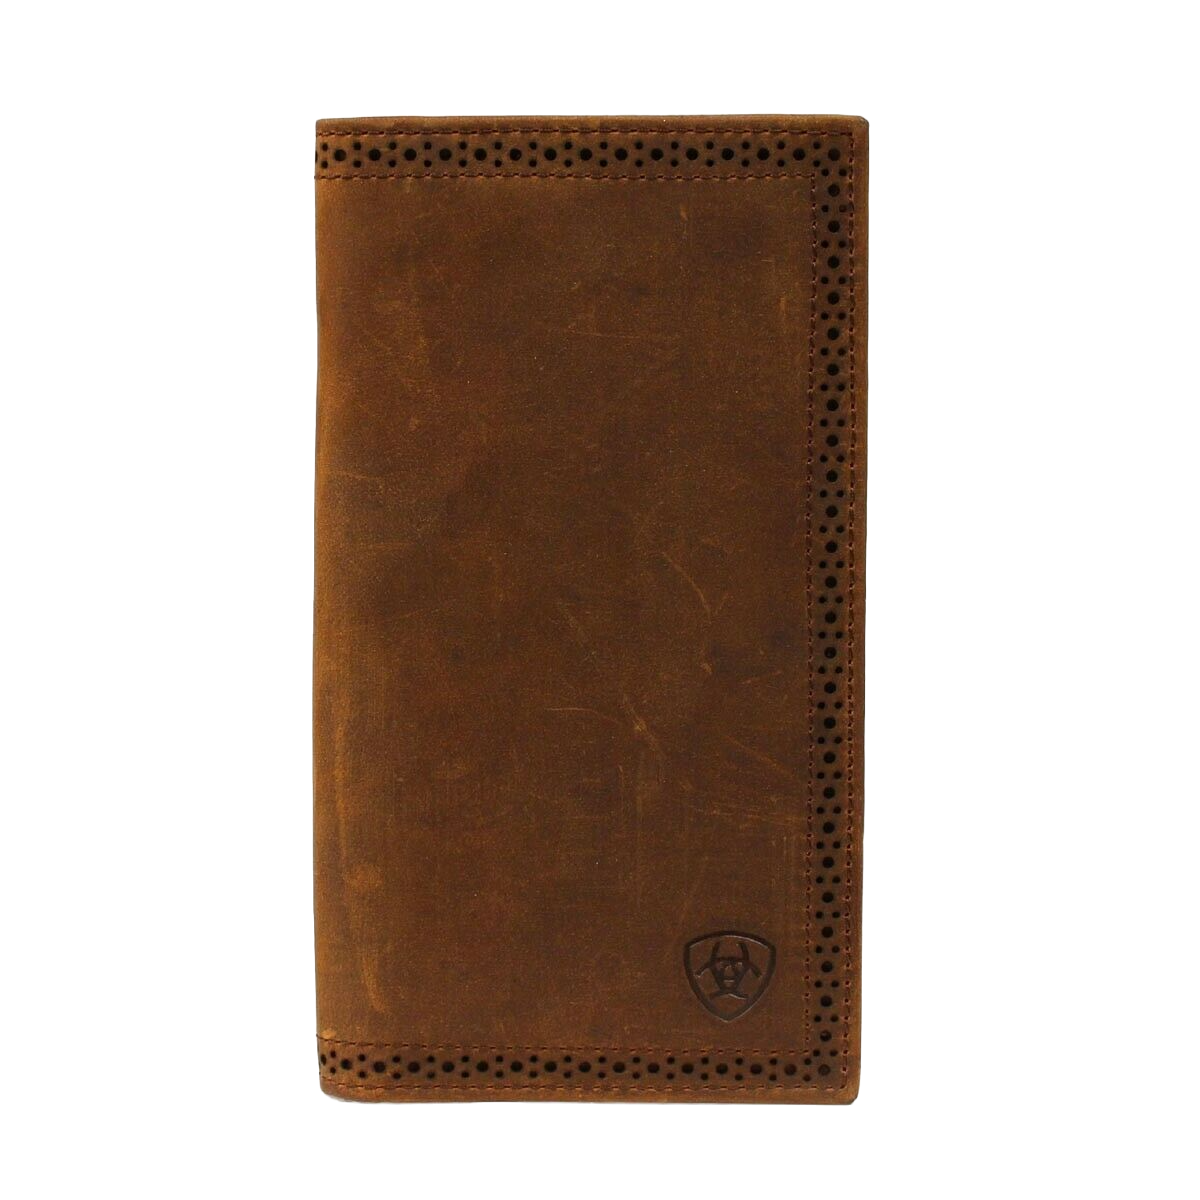 Ariat Men's Brown Distressed Rodeo Style Wallet A3512644